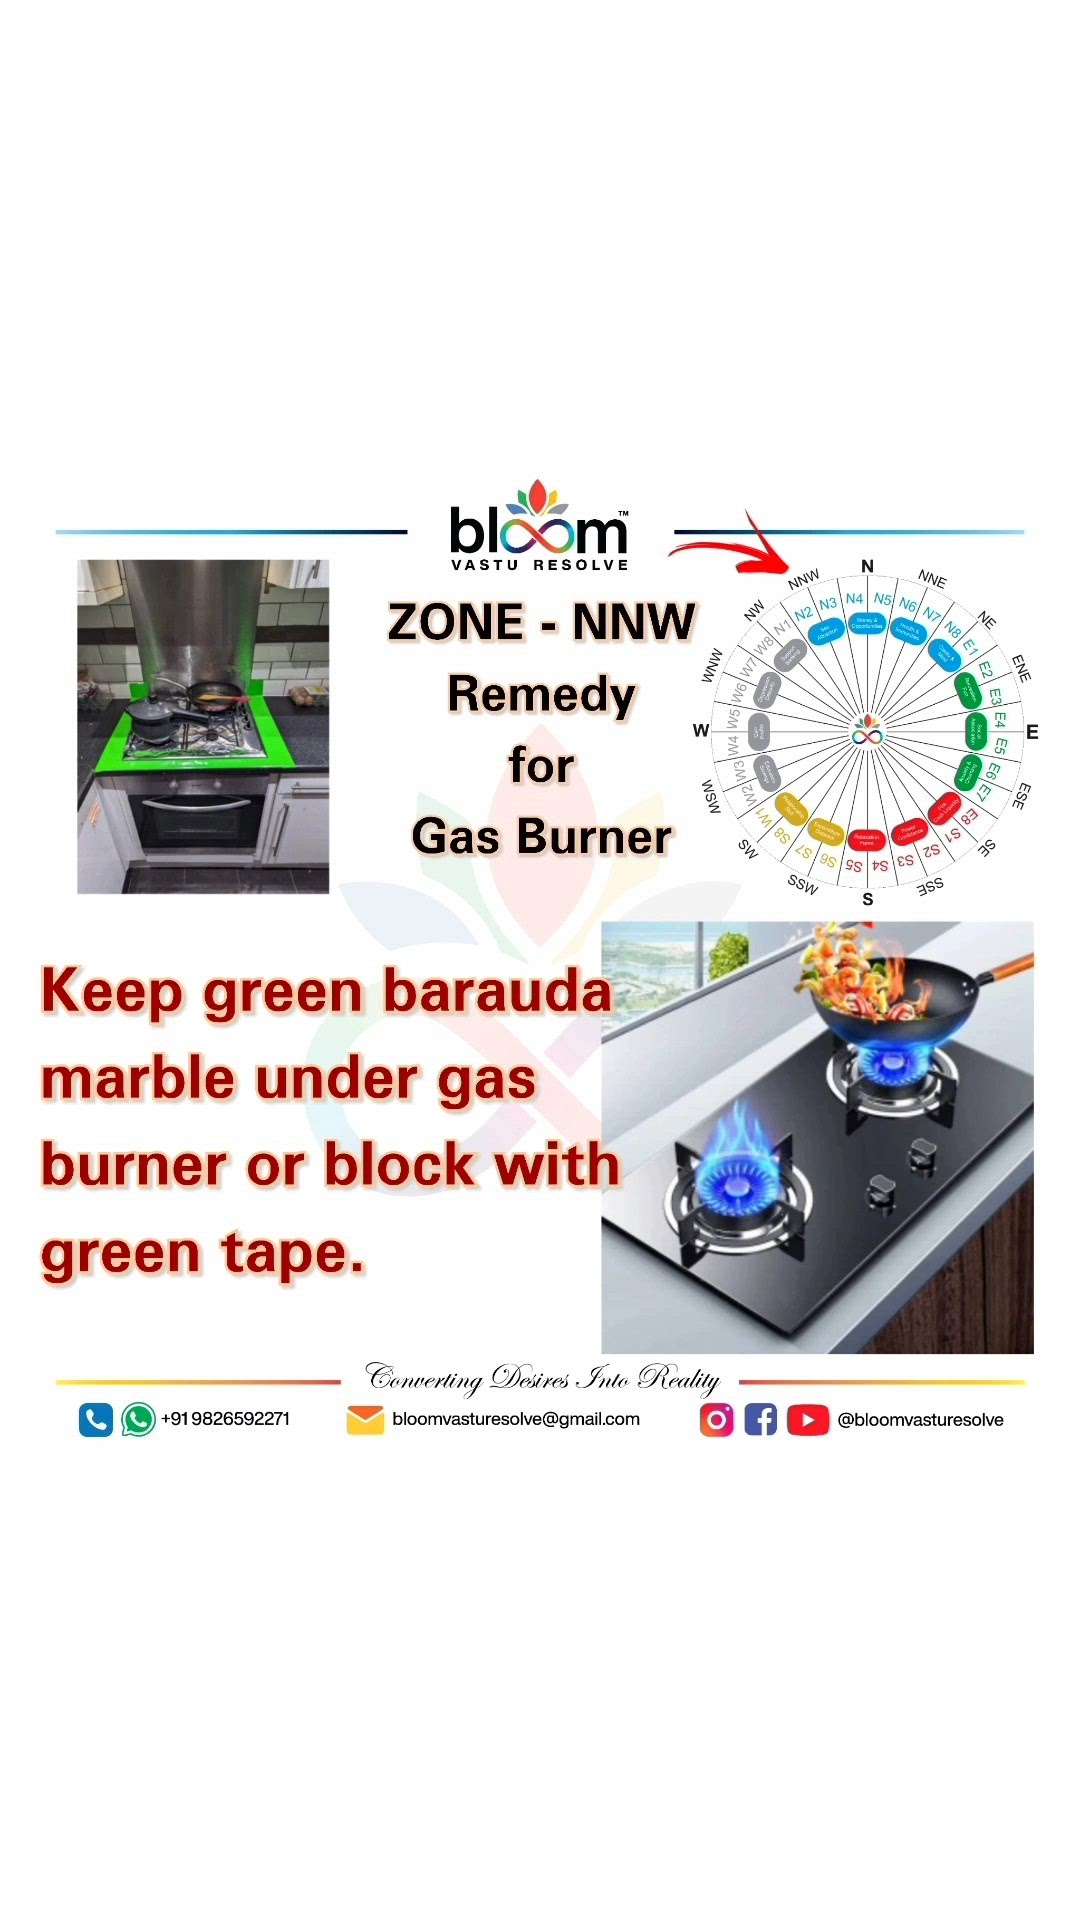 Remedy for North of North West zone Gas burner..
Your queries and comments are always welcome.
For more Vastu please follow @bloomvasturesolve
on YouTube, Instagram & Facebook
.
.
For personal consultation, feel free to contact certified MahaVastu Expert through
M - 9826592271
Or
bloomvasturesolve@gmail.com
#vastu #वास्तु #mahavastu #mahavastuexpert #bloomvasturesolve  #vastureels #vastulogy #vastuexpert  #vasturemedies  #vastuforhome #vastuforpeace #vastudosh #nnwzone #gasburner  #kitchenvastu  #relaxation #trendingreels #couplerelationship